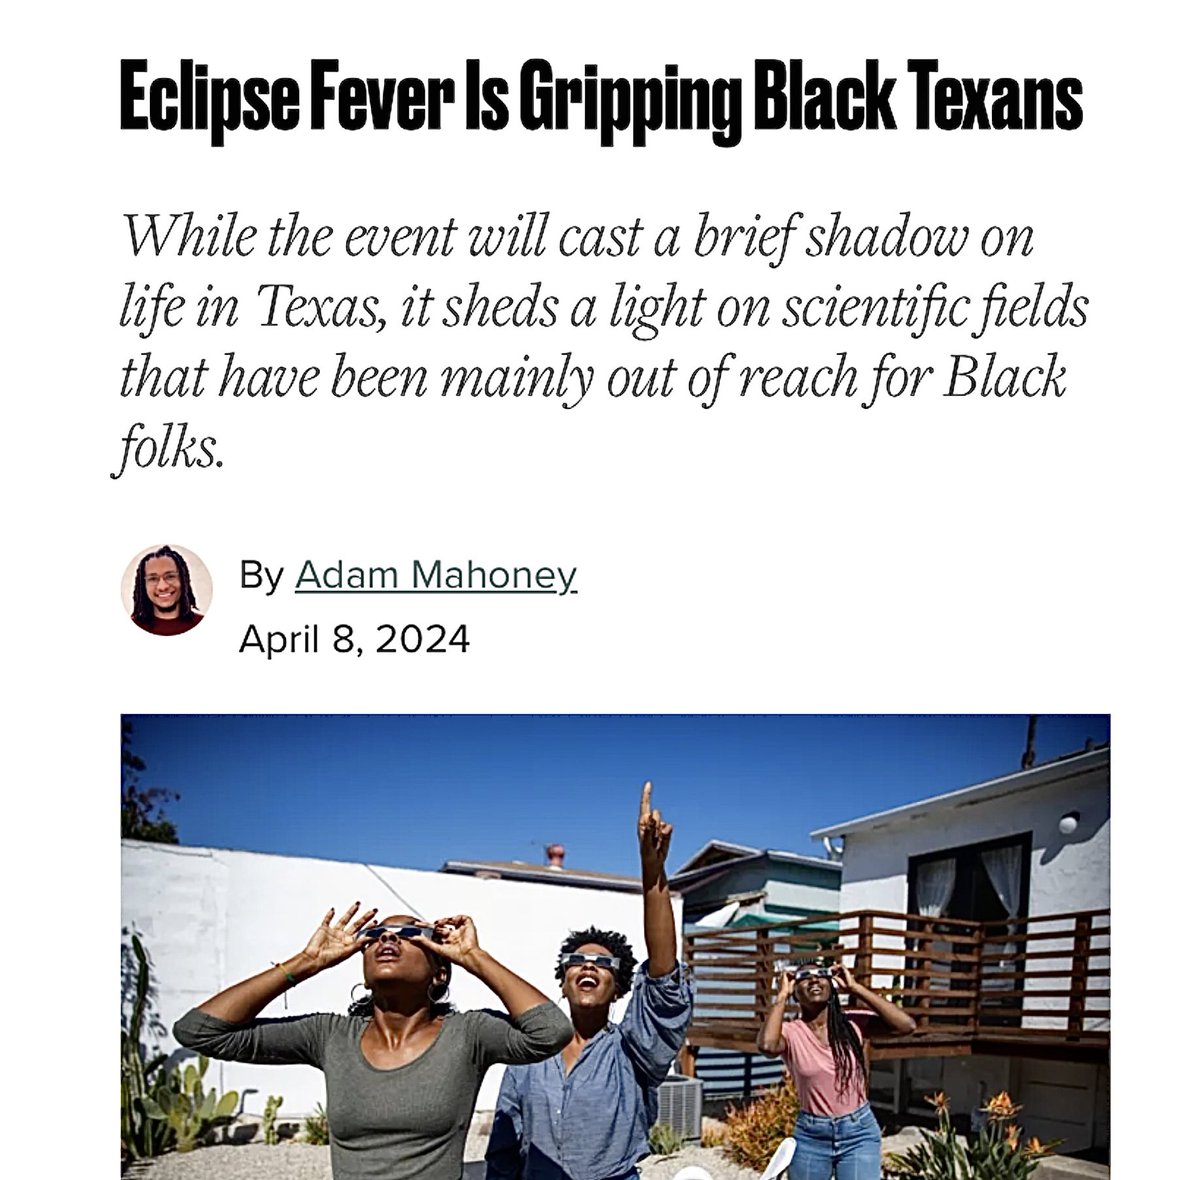 They did it. They found a way to make a solar eclipse about racism.